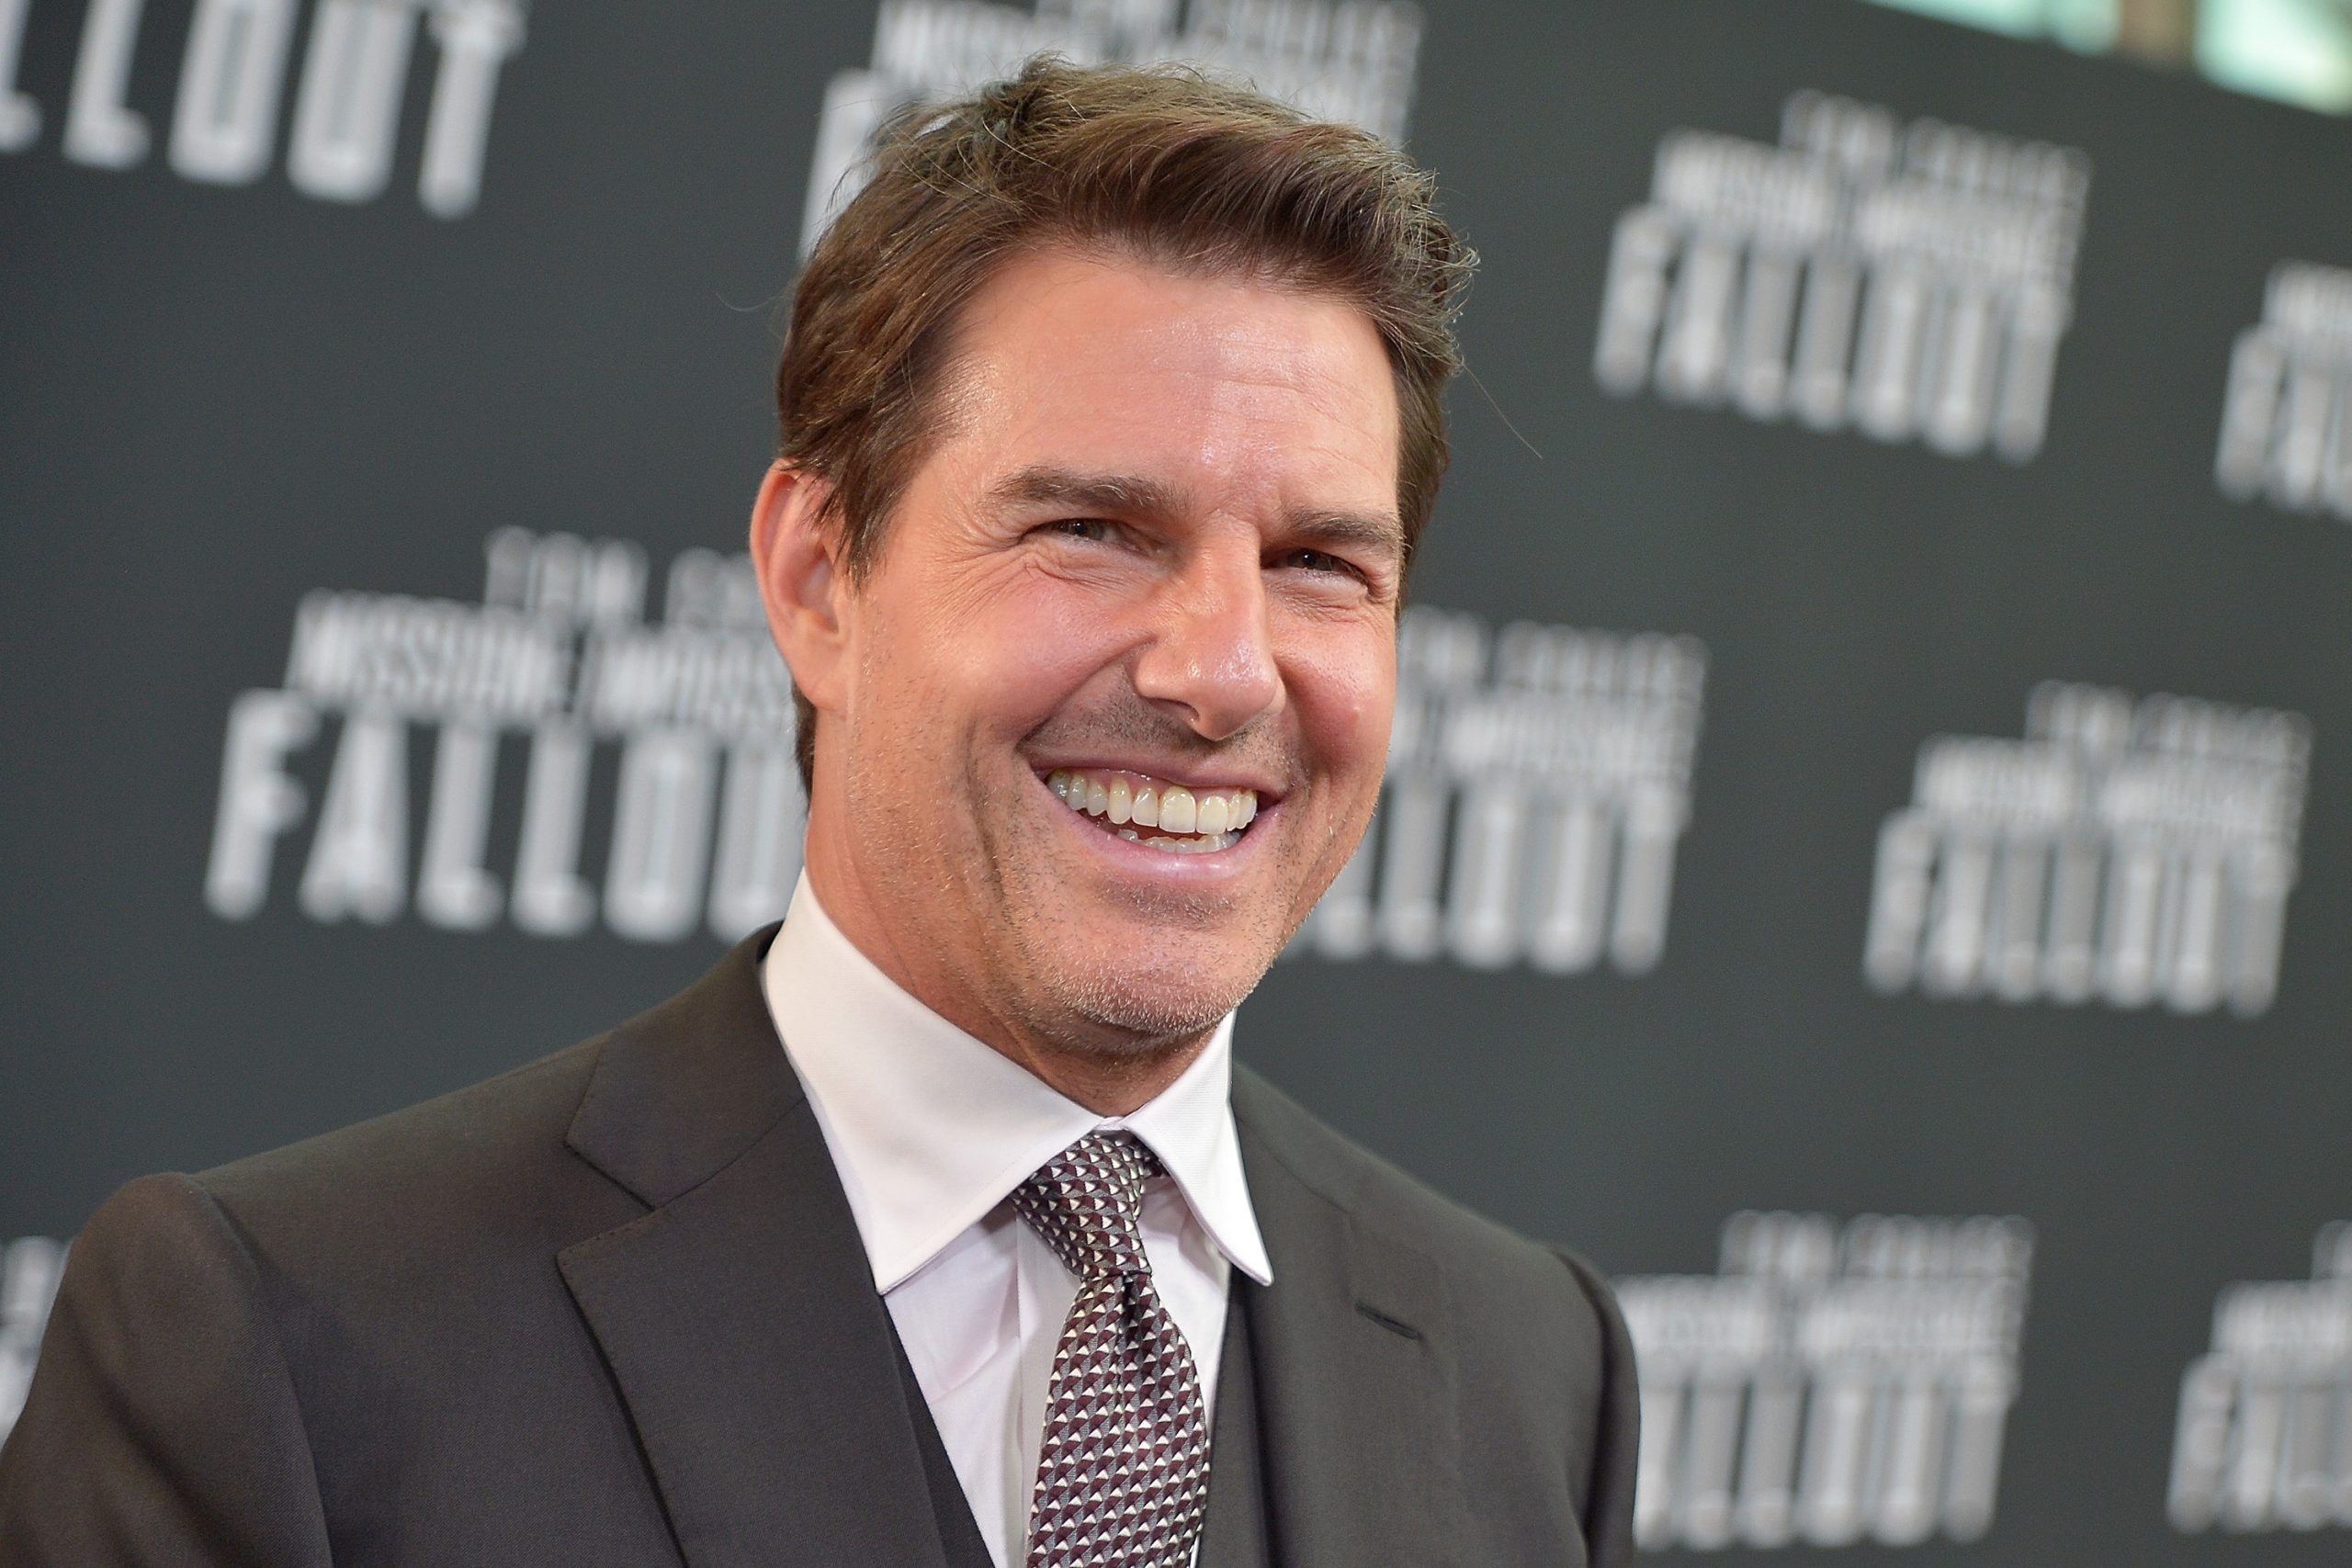 Tom Cruise Movies 'Top Gun Maverick' and 'Mission Impossible 7' Debut